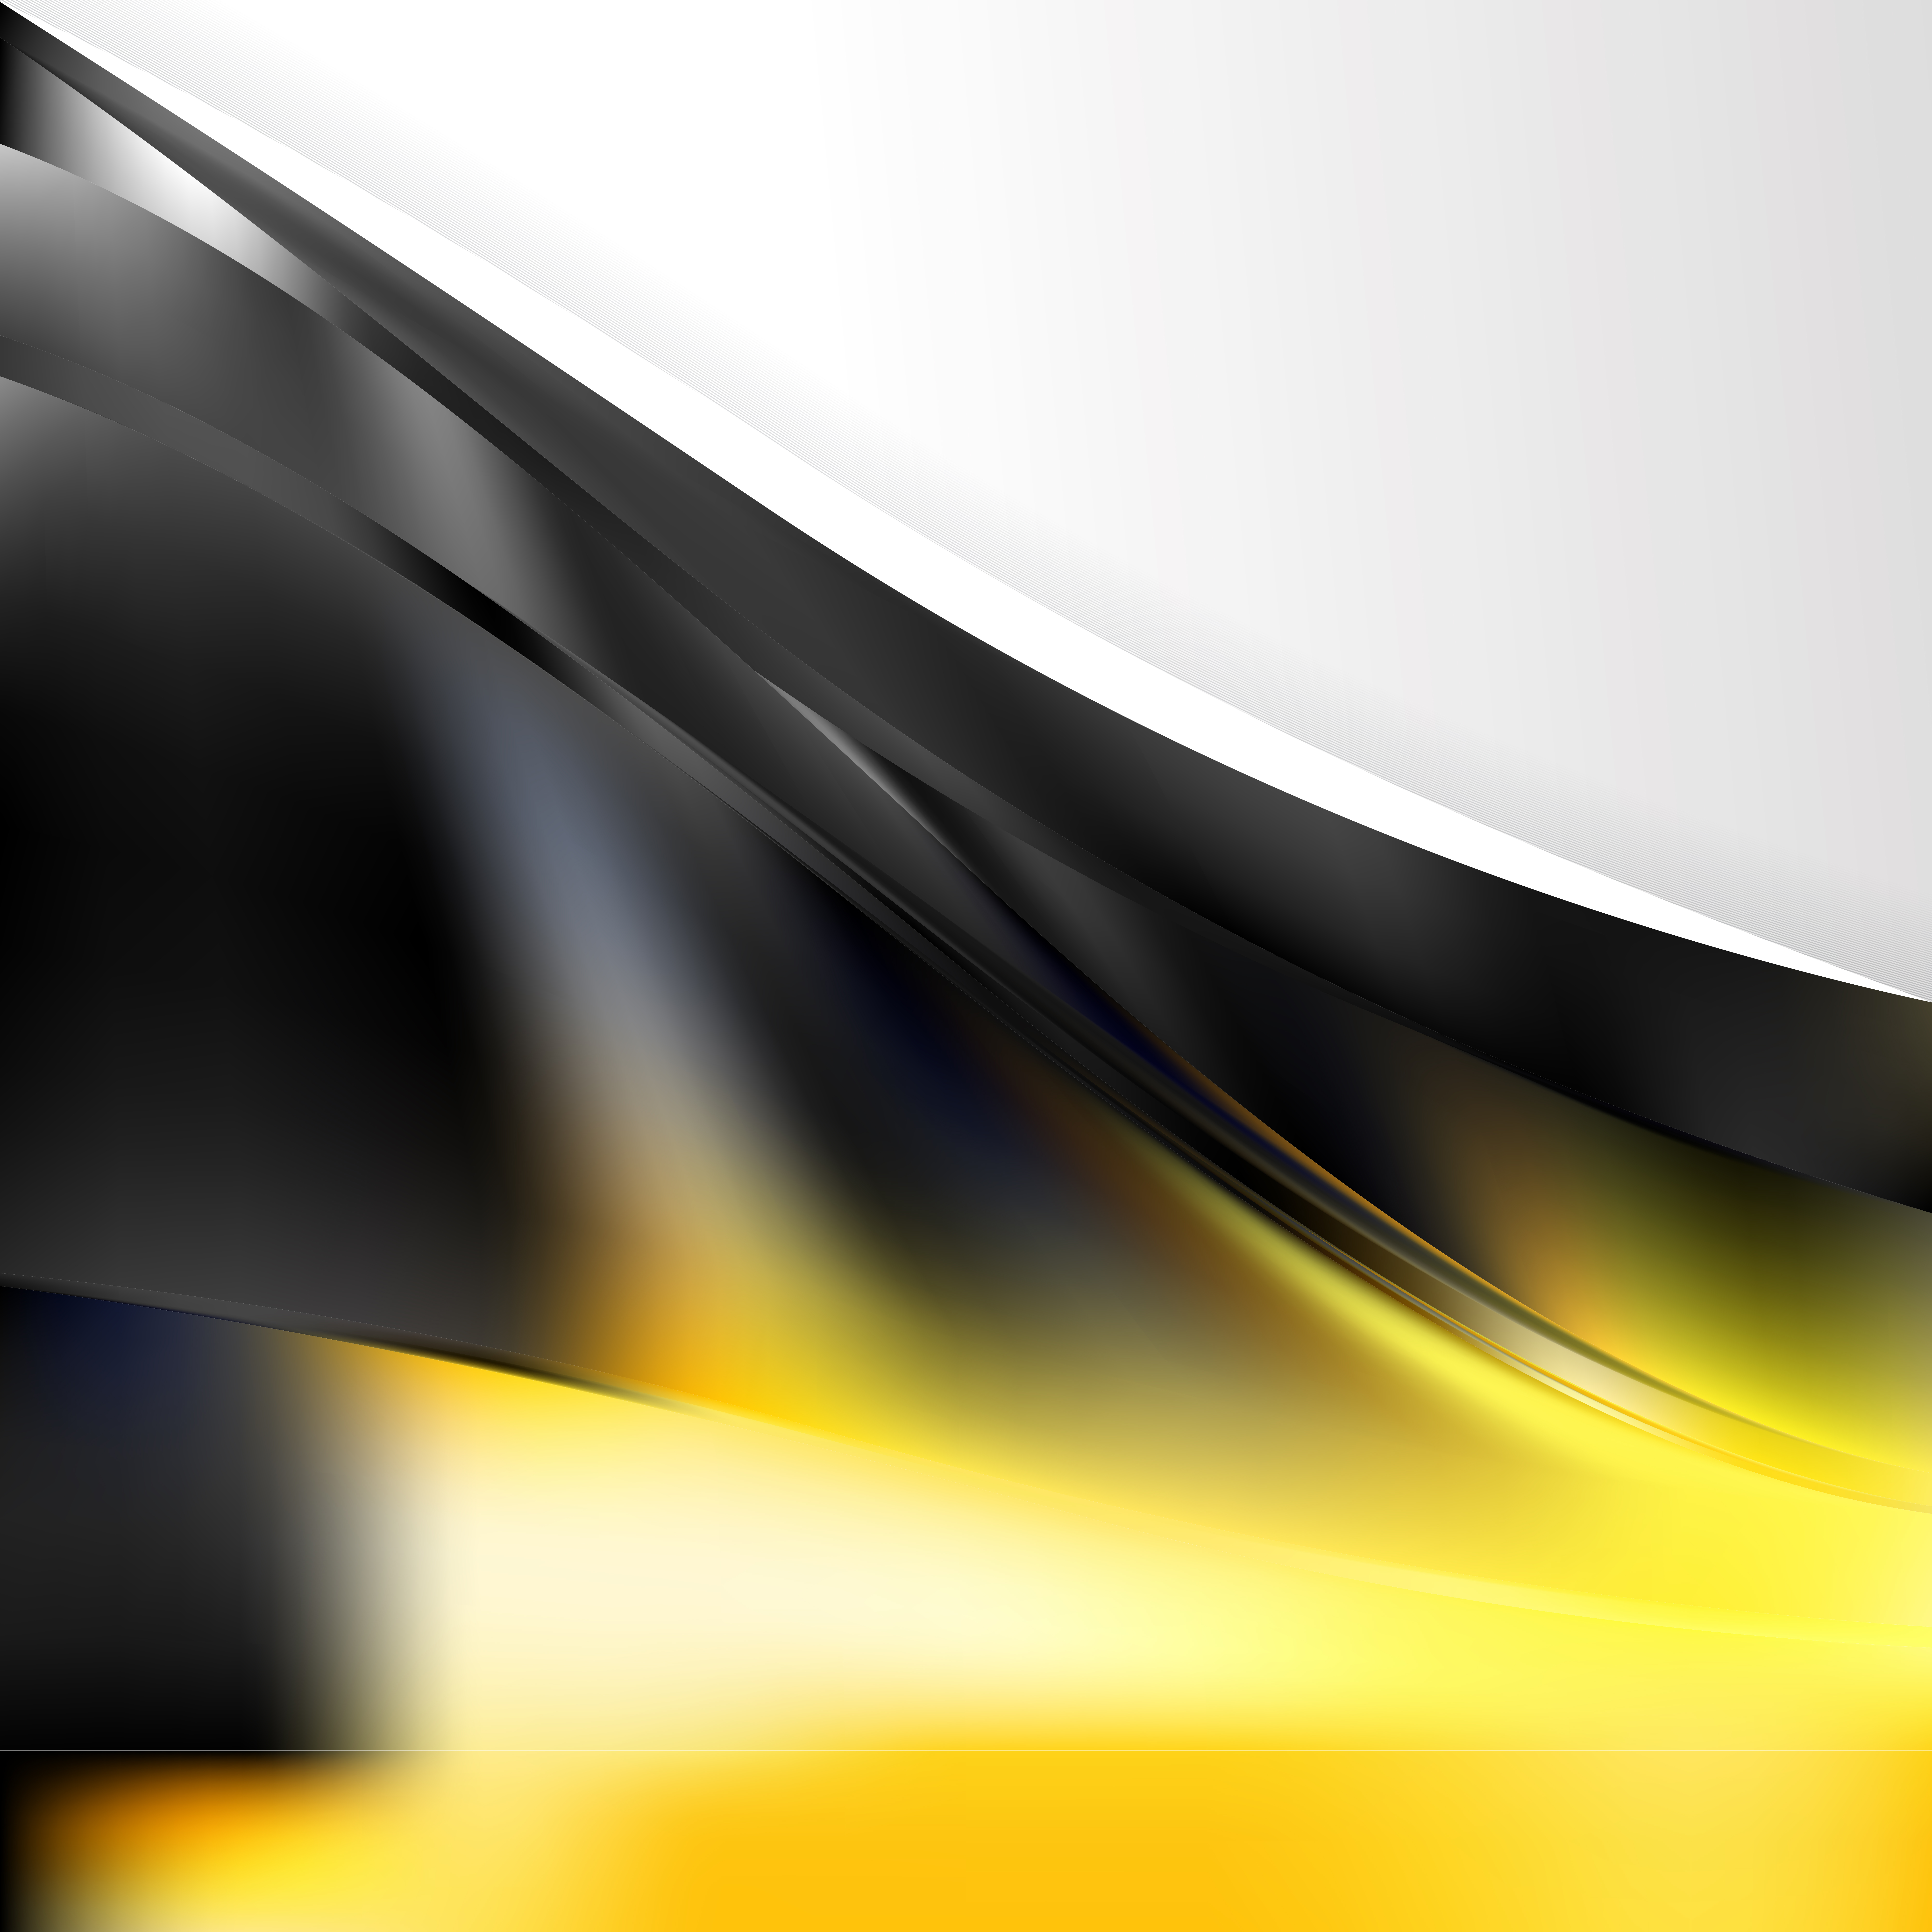 Free Abstract Black and Yellow Background Design Template